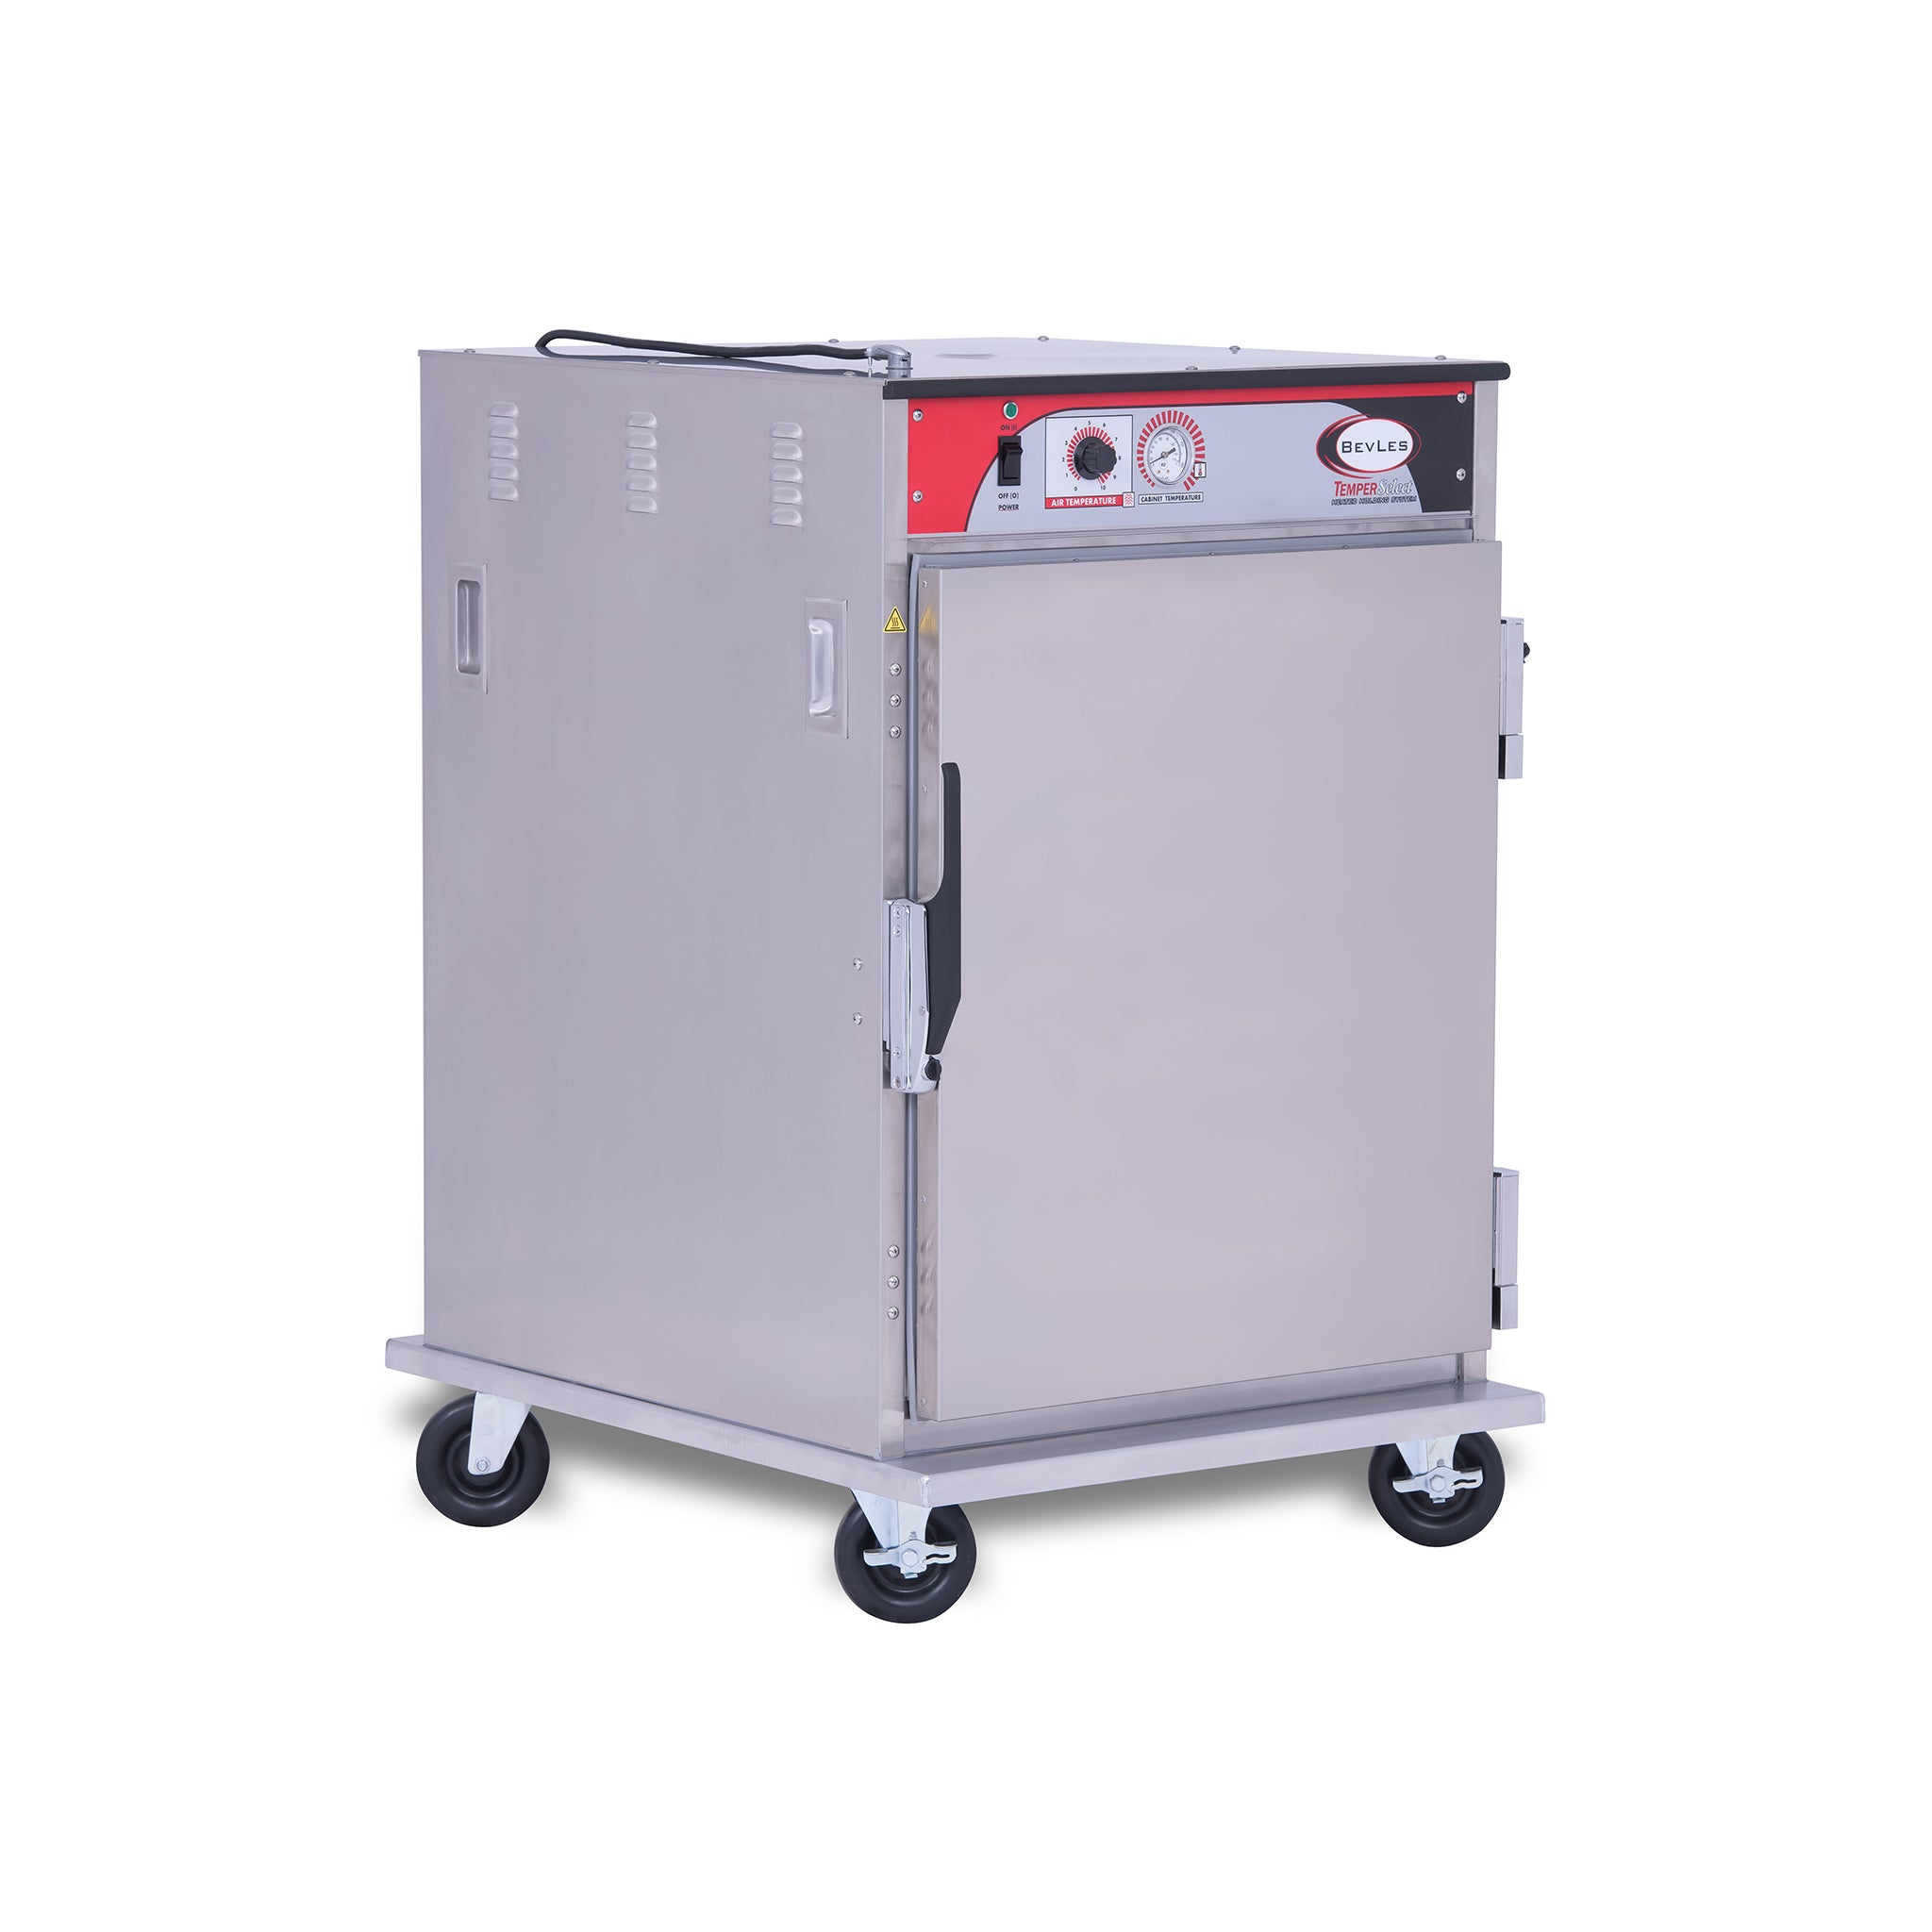 BevLes - HTSS44P84, BevLes Temper Select 1/2 Size Heated Holding Cabinet, Narrow Width, 230V, in Silver